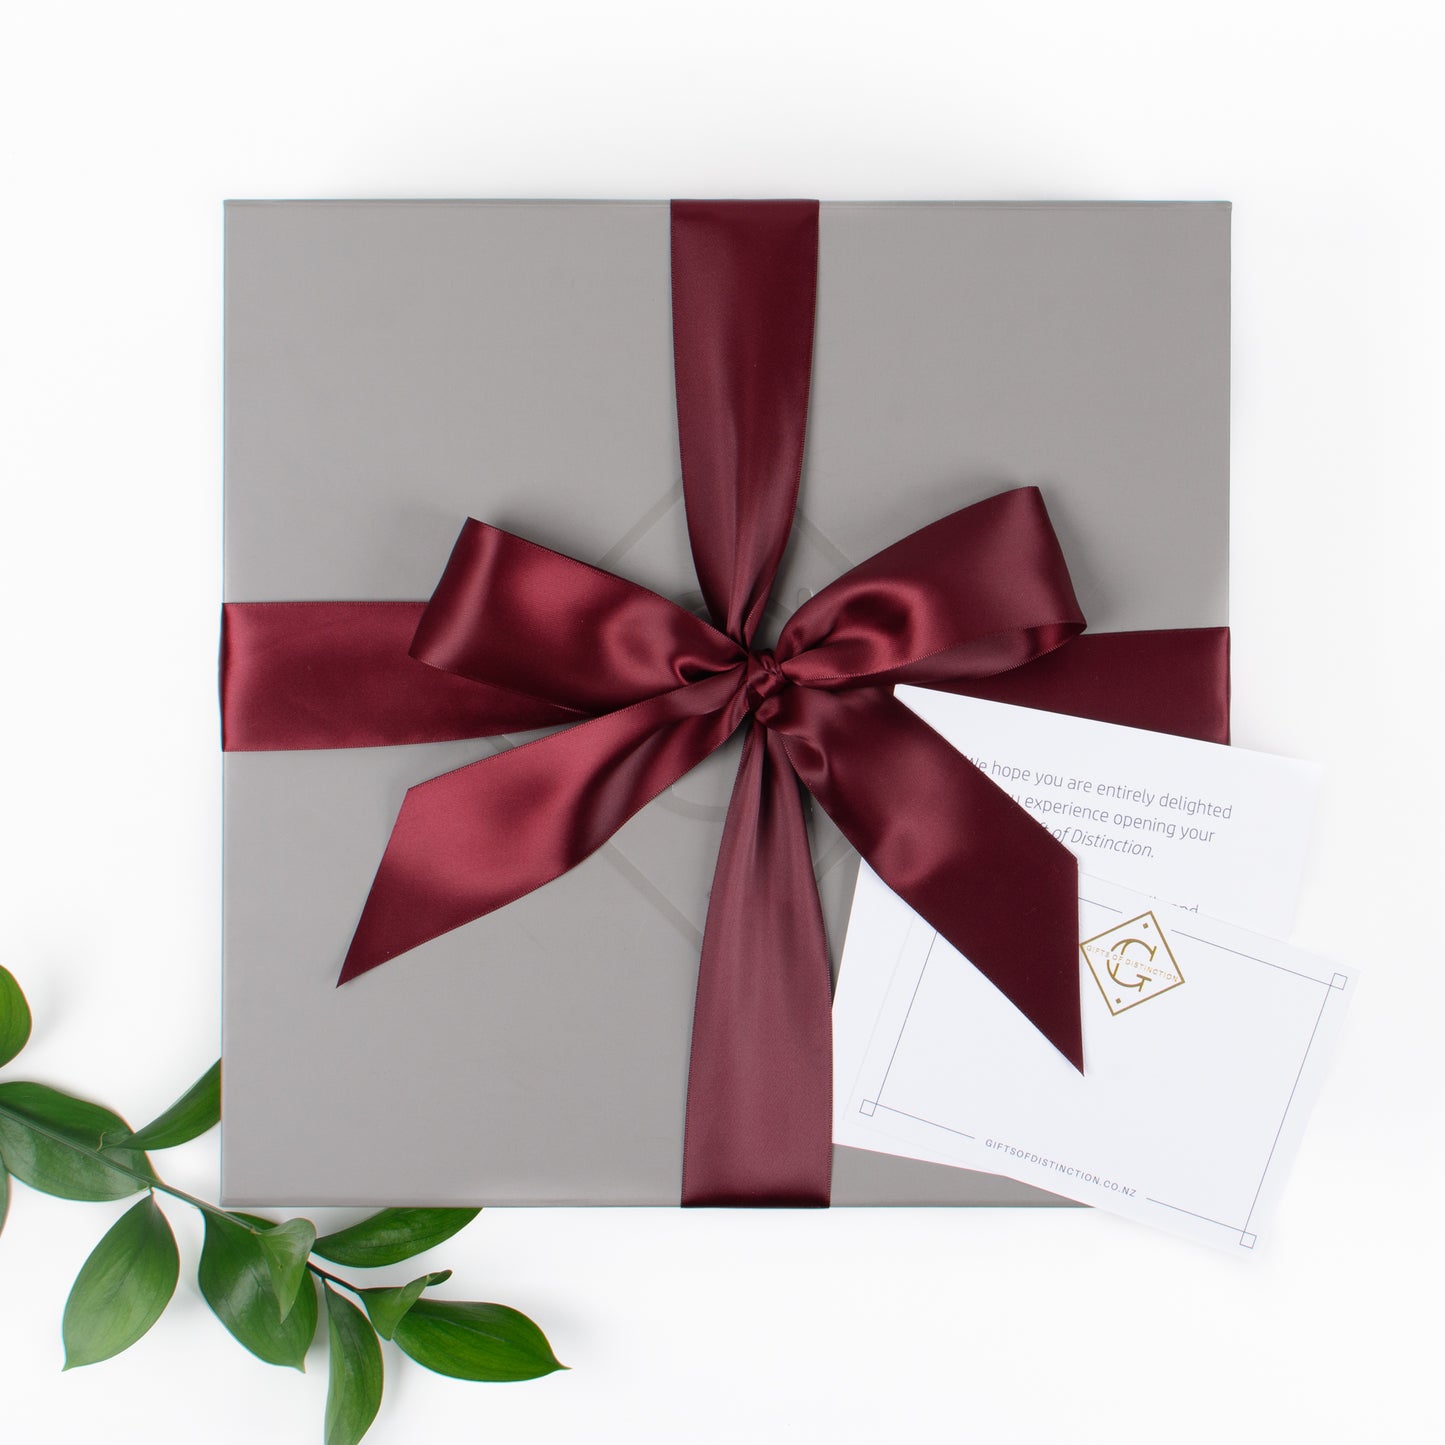 Everlasting - Gift Boxes NZ - Gifts of Distinction